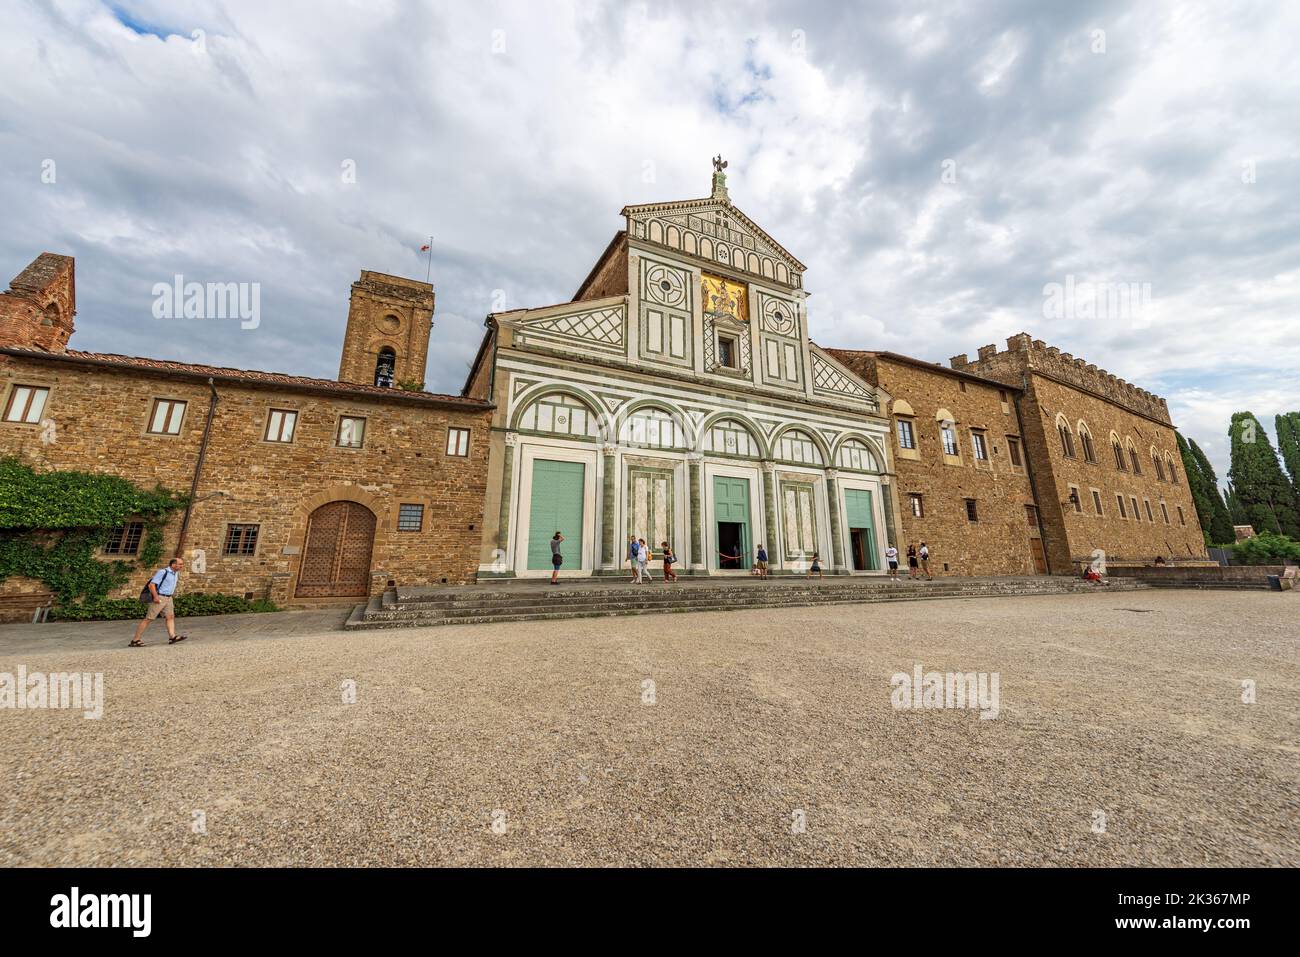 The main facade of the famous Basilica of San Miniato al Monte in Florentine Romanesque style (1013 - XII century). Tuscany, Italy, Europe. Stock Photo